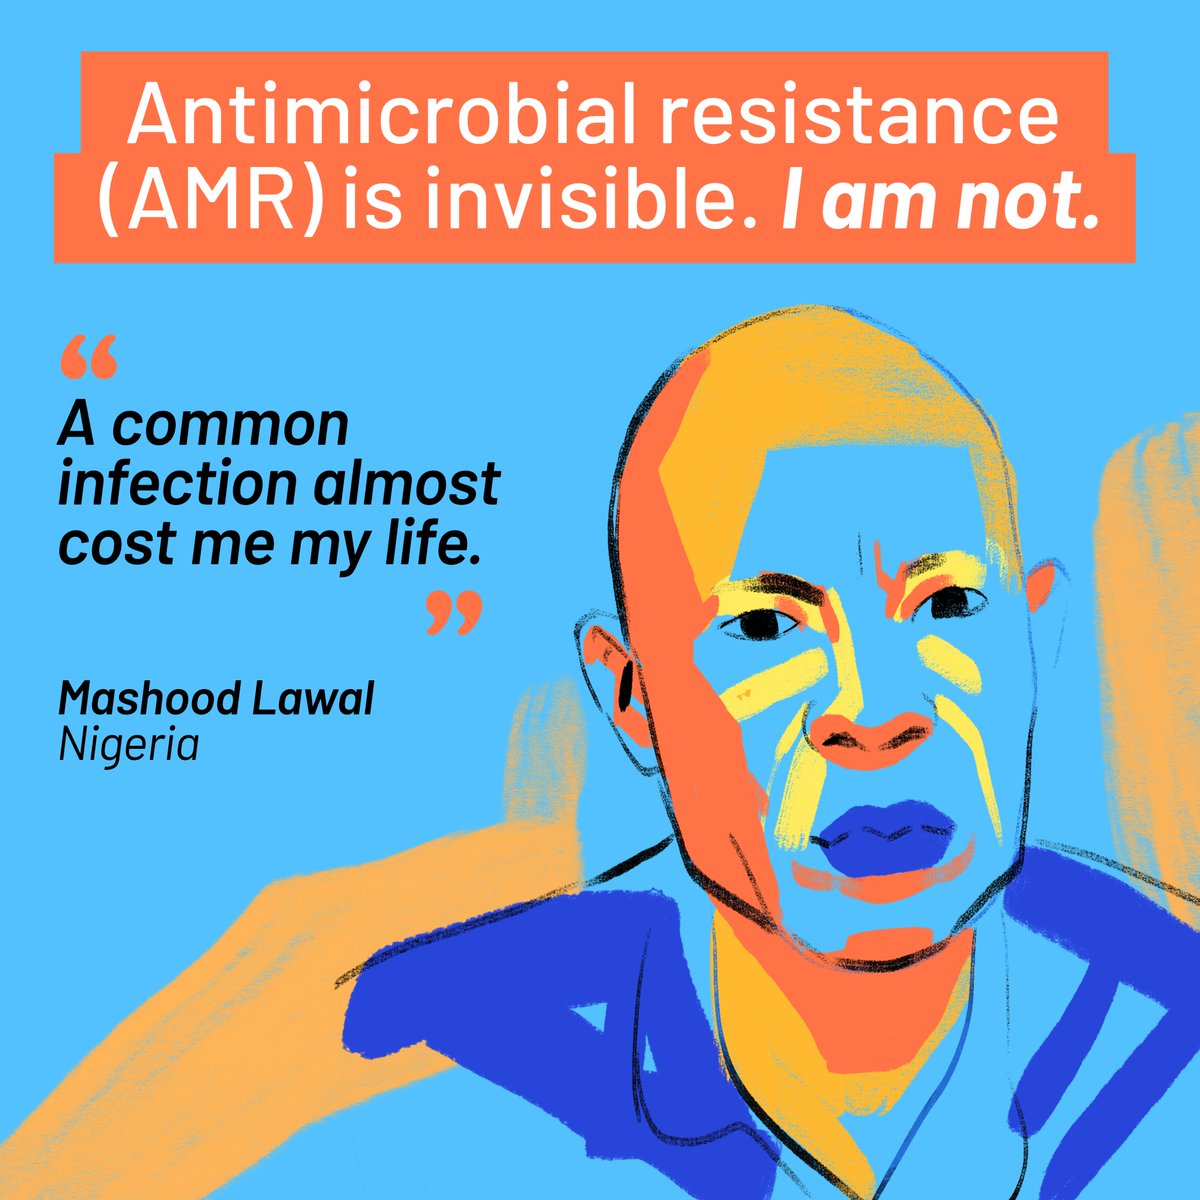 Have you seen the @WHO campaign 'Antimicrobial resistance (AMR) is invisible. I am not.'? First hand stories have the power to change lives, extend perspectives and stimulate behavior changes. Let's raise the awareness about #amr. Let's fight it together.